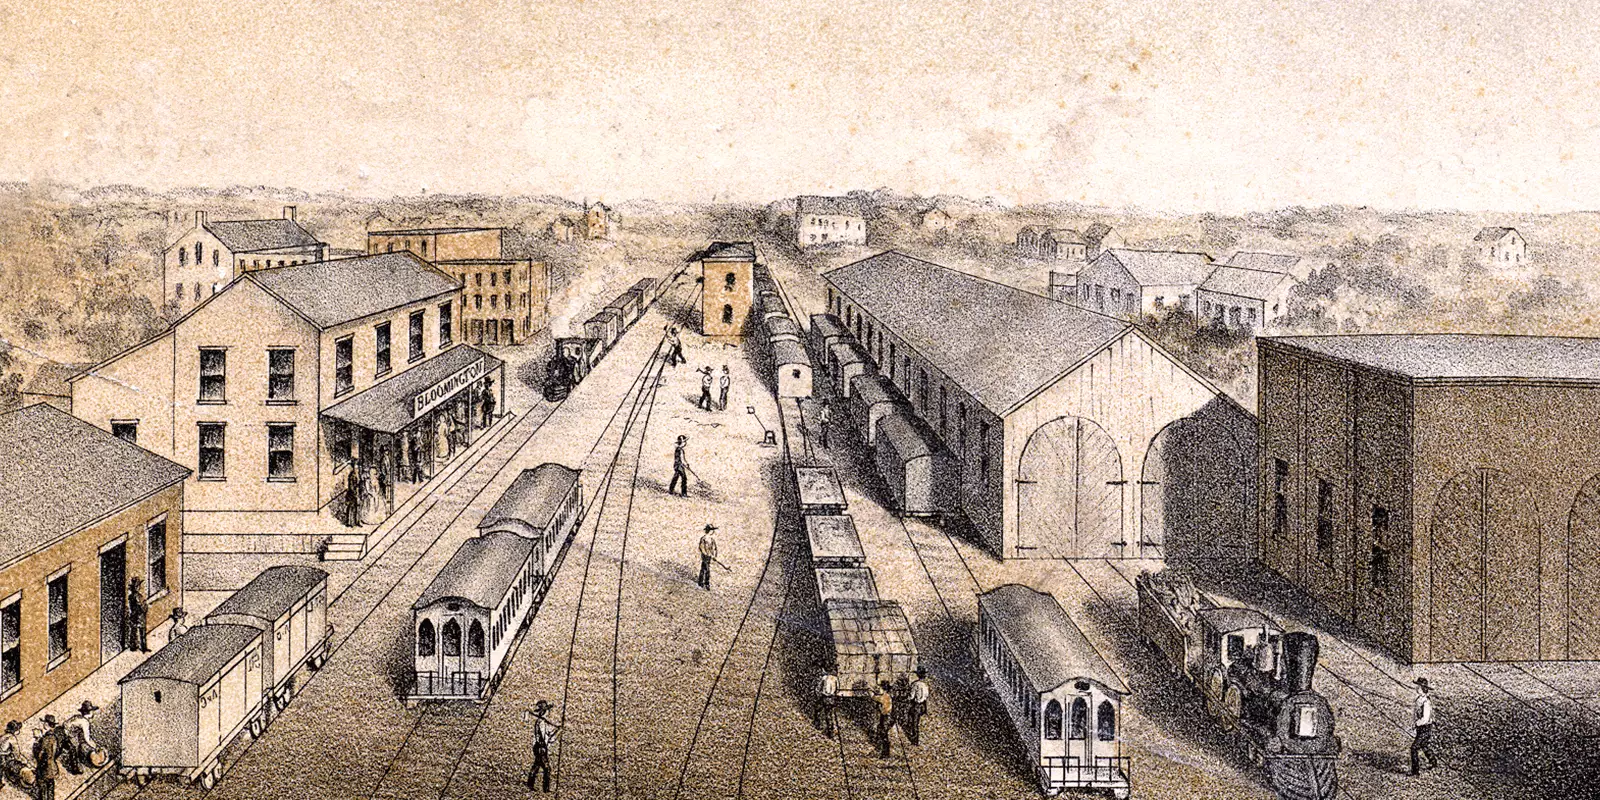 Railroad depot with six or seven railroads, showing a town on the left, and cars on the tracks while people walk around.